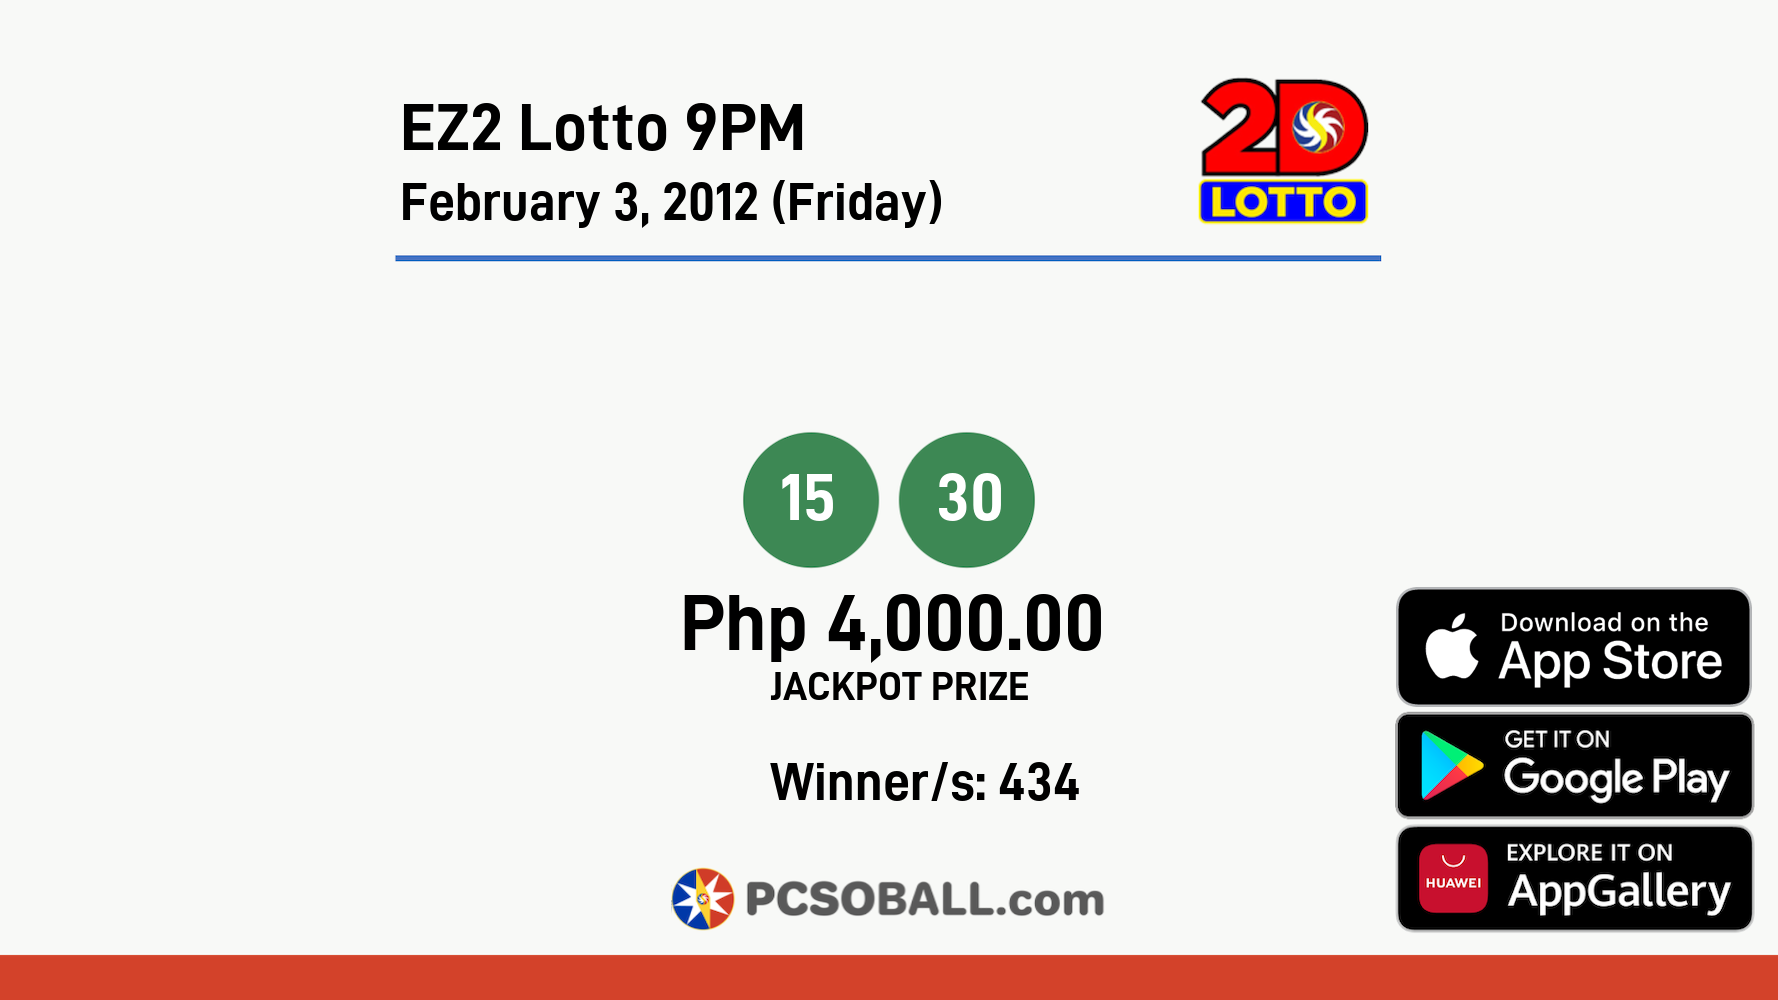 EZ2 Lotto 9PM February 3, 2012 (Friday) Result